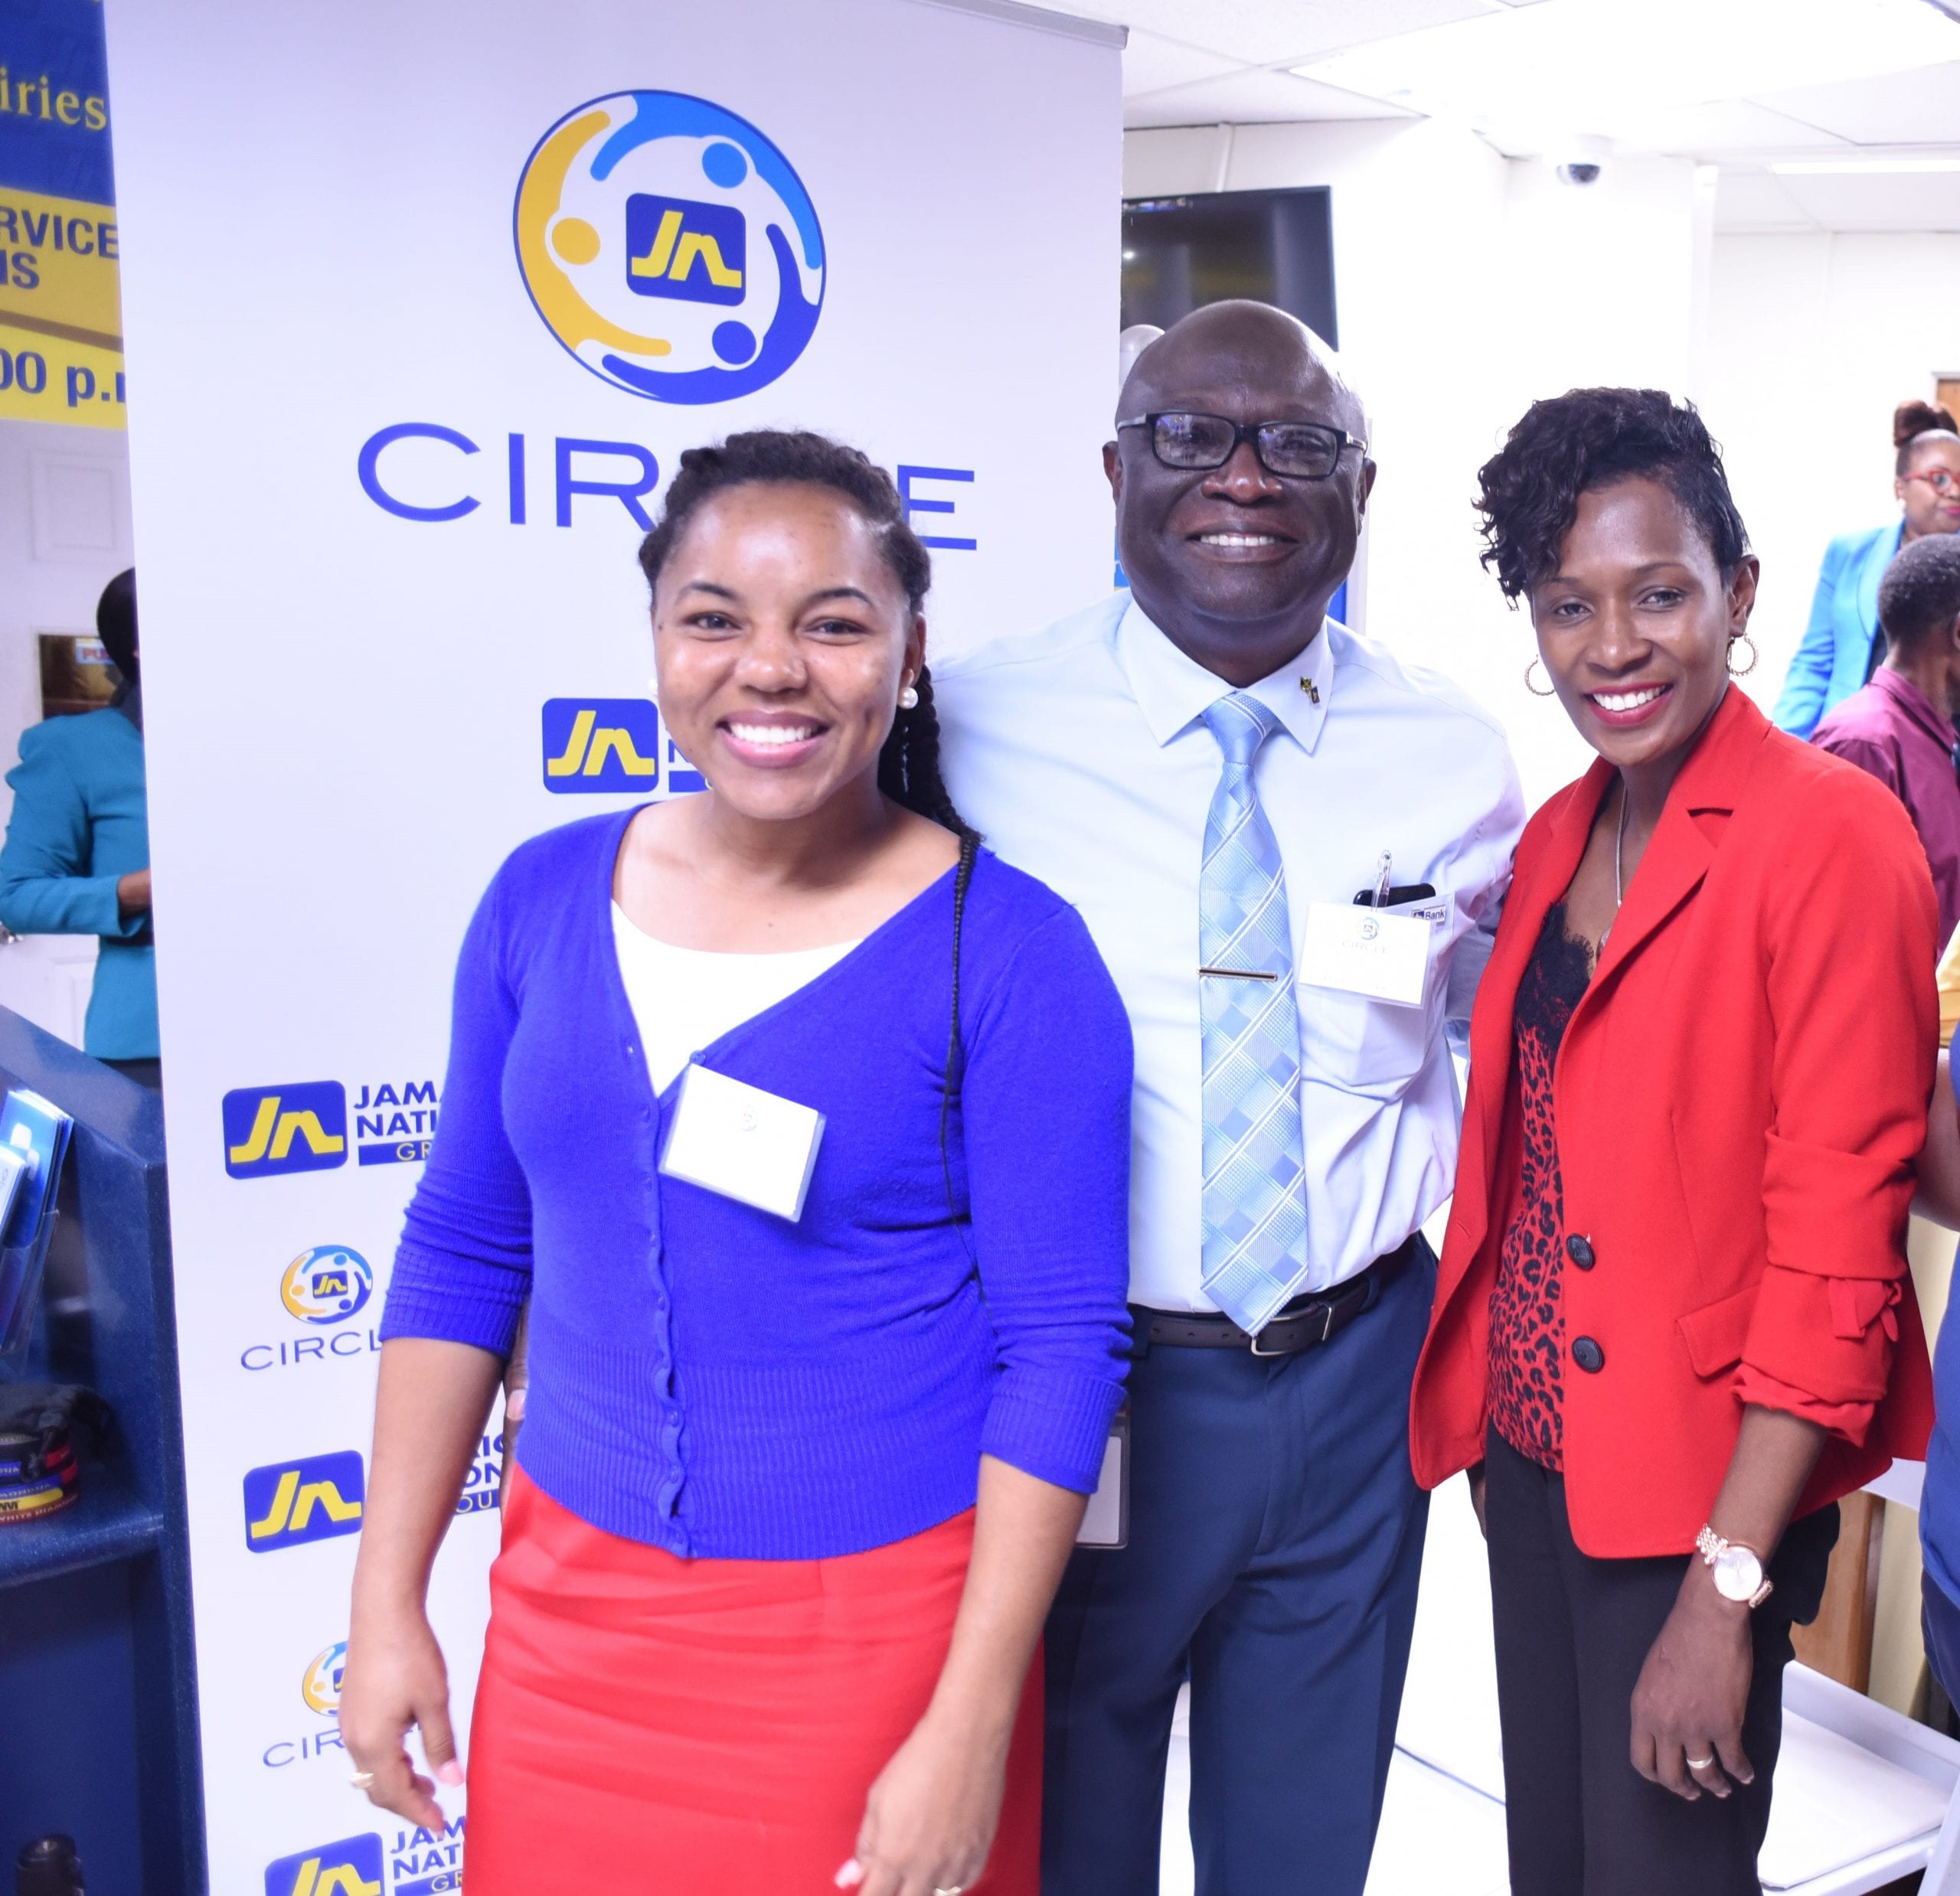 Councillor Andria Dehaney-Dinham (right), deputy mayor of Lucea takes a group photo with Denise Bennett (left), JN member and Canute Simpson, business relationship and sales manager, JN Bank, Savanna-La-Mar and Lucea at the inaugural meeting of the JN Circle, recently.